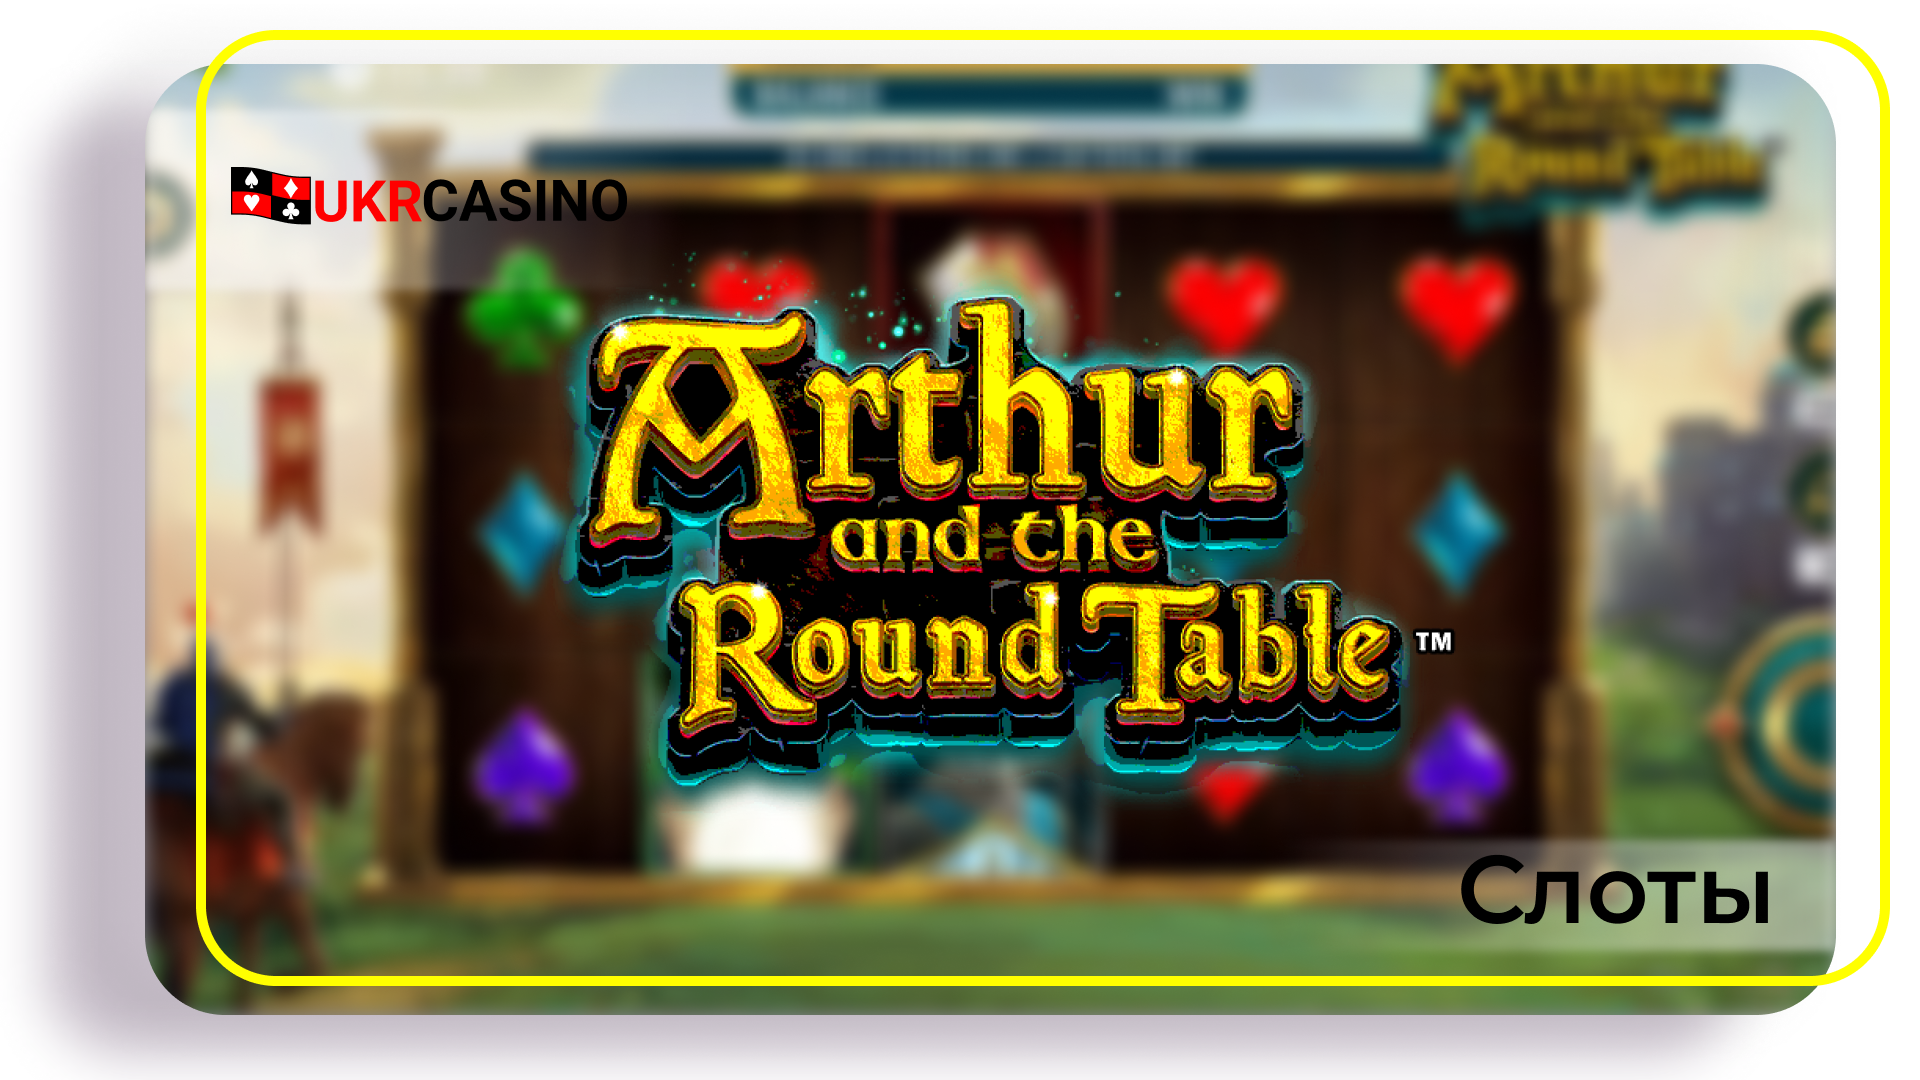 Arthur and the Round Table - WMS